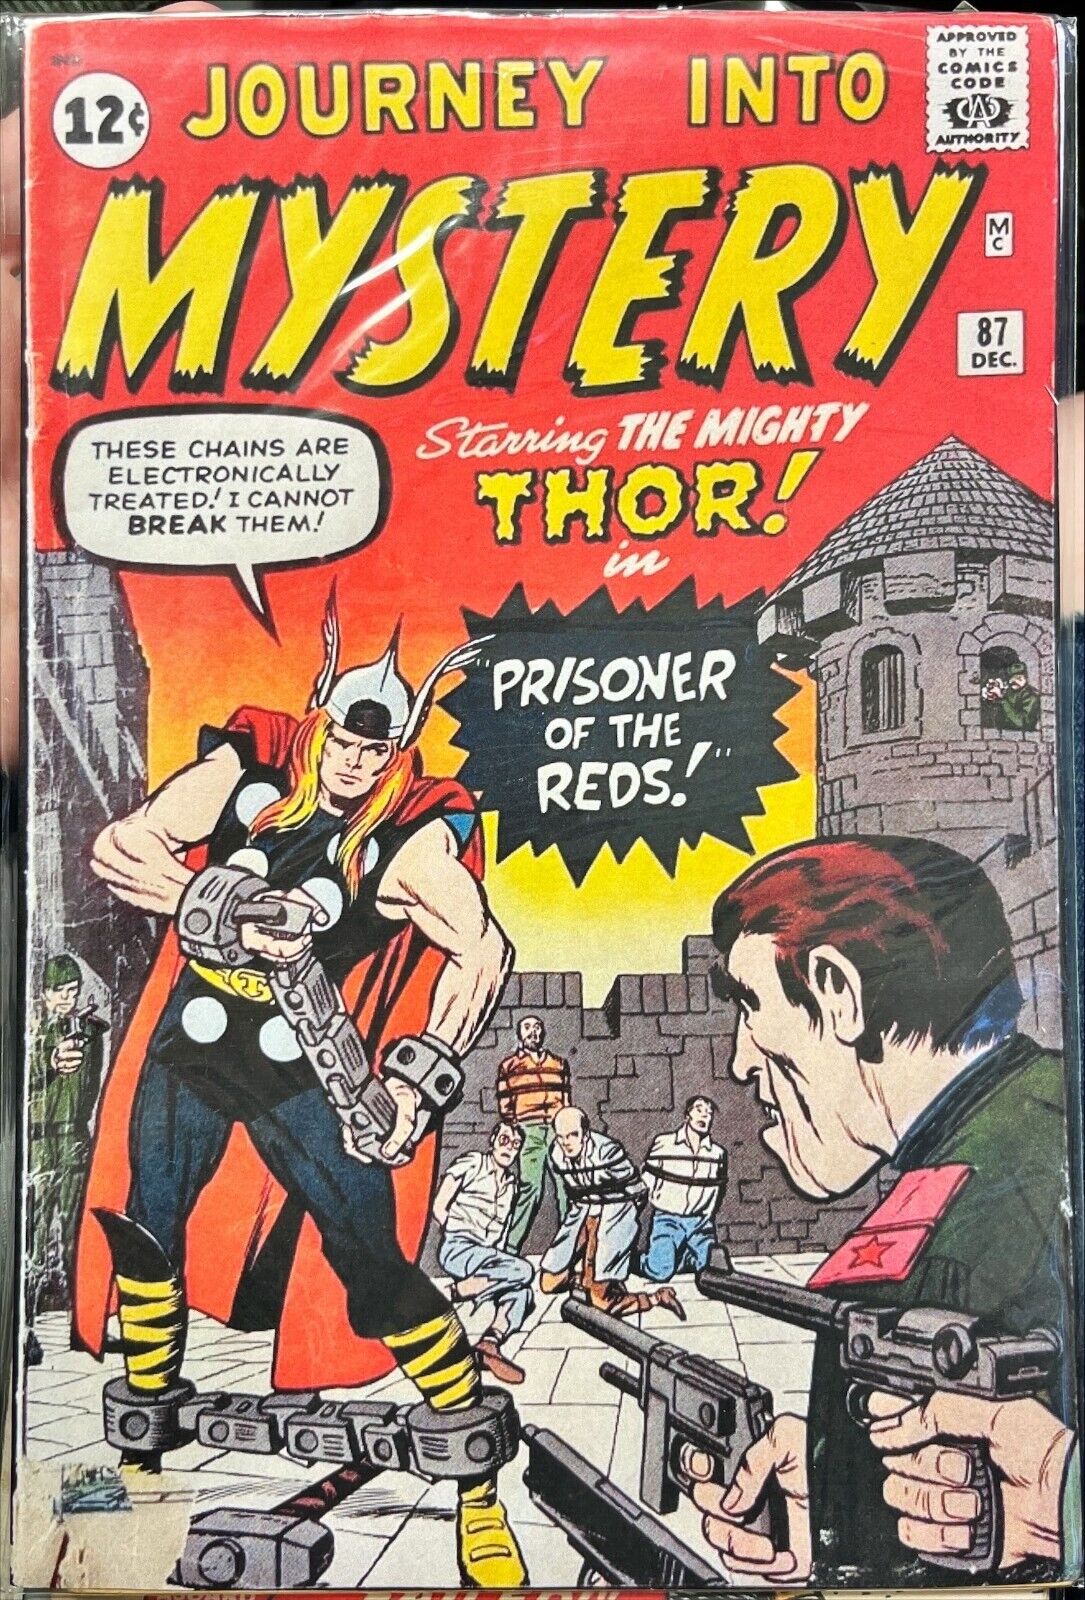 Journey into Mystery #87 Starring Thor